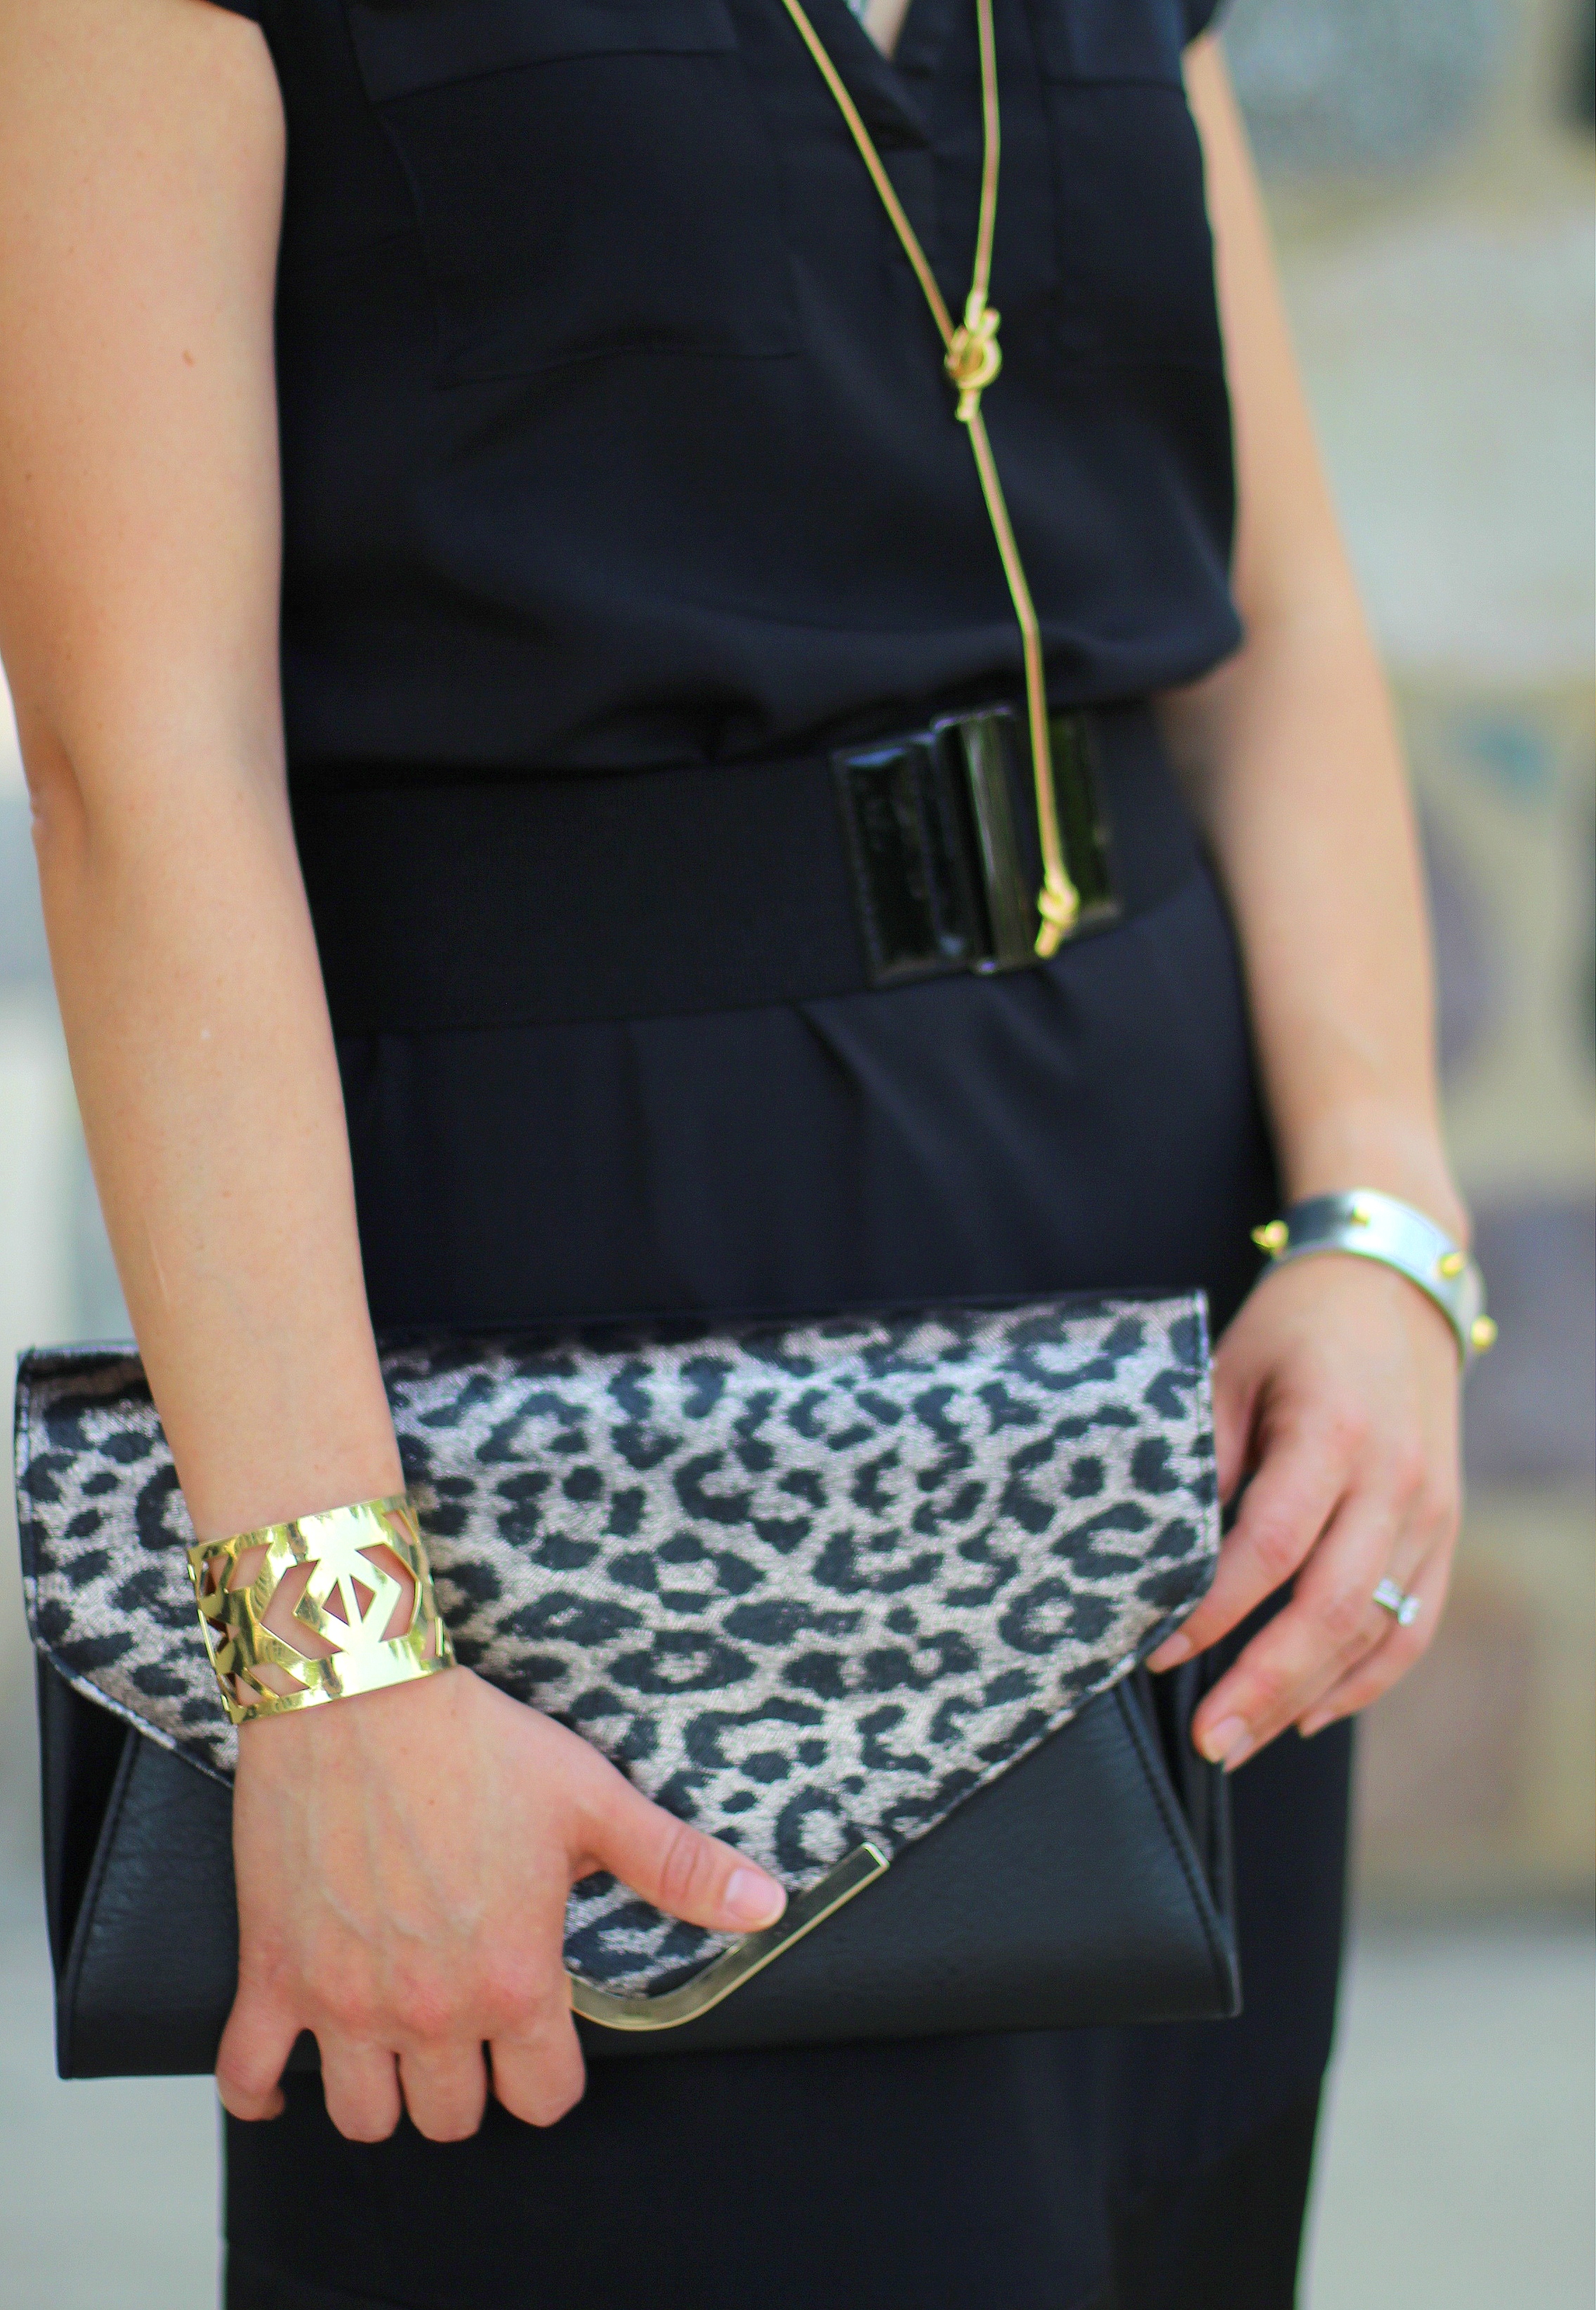 Outfit Highlight: Black and Gold - My Rose Colored Shades